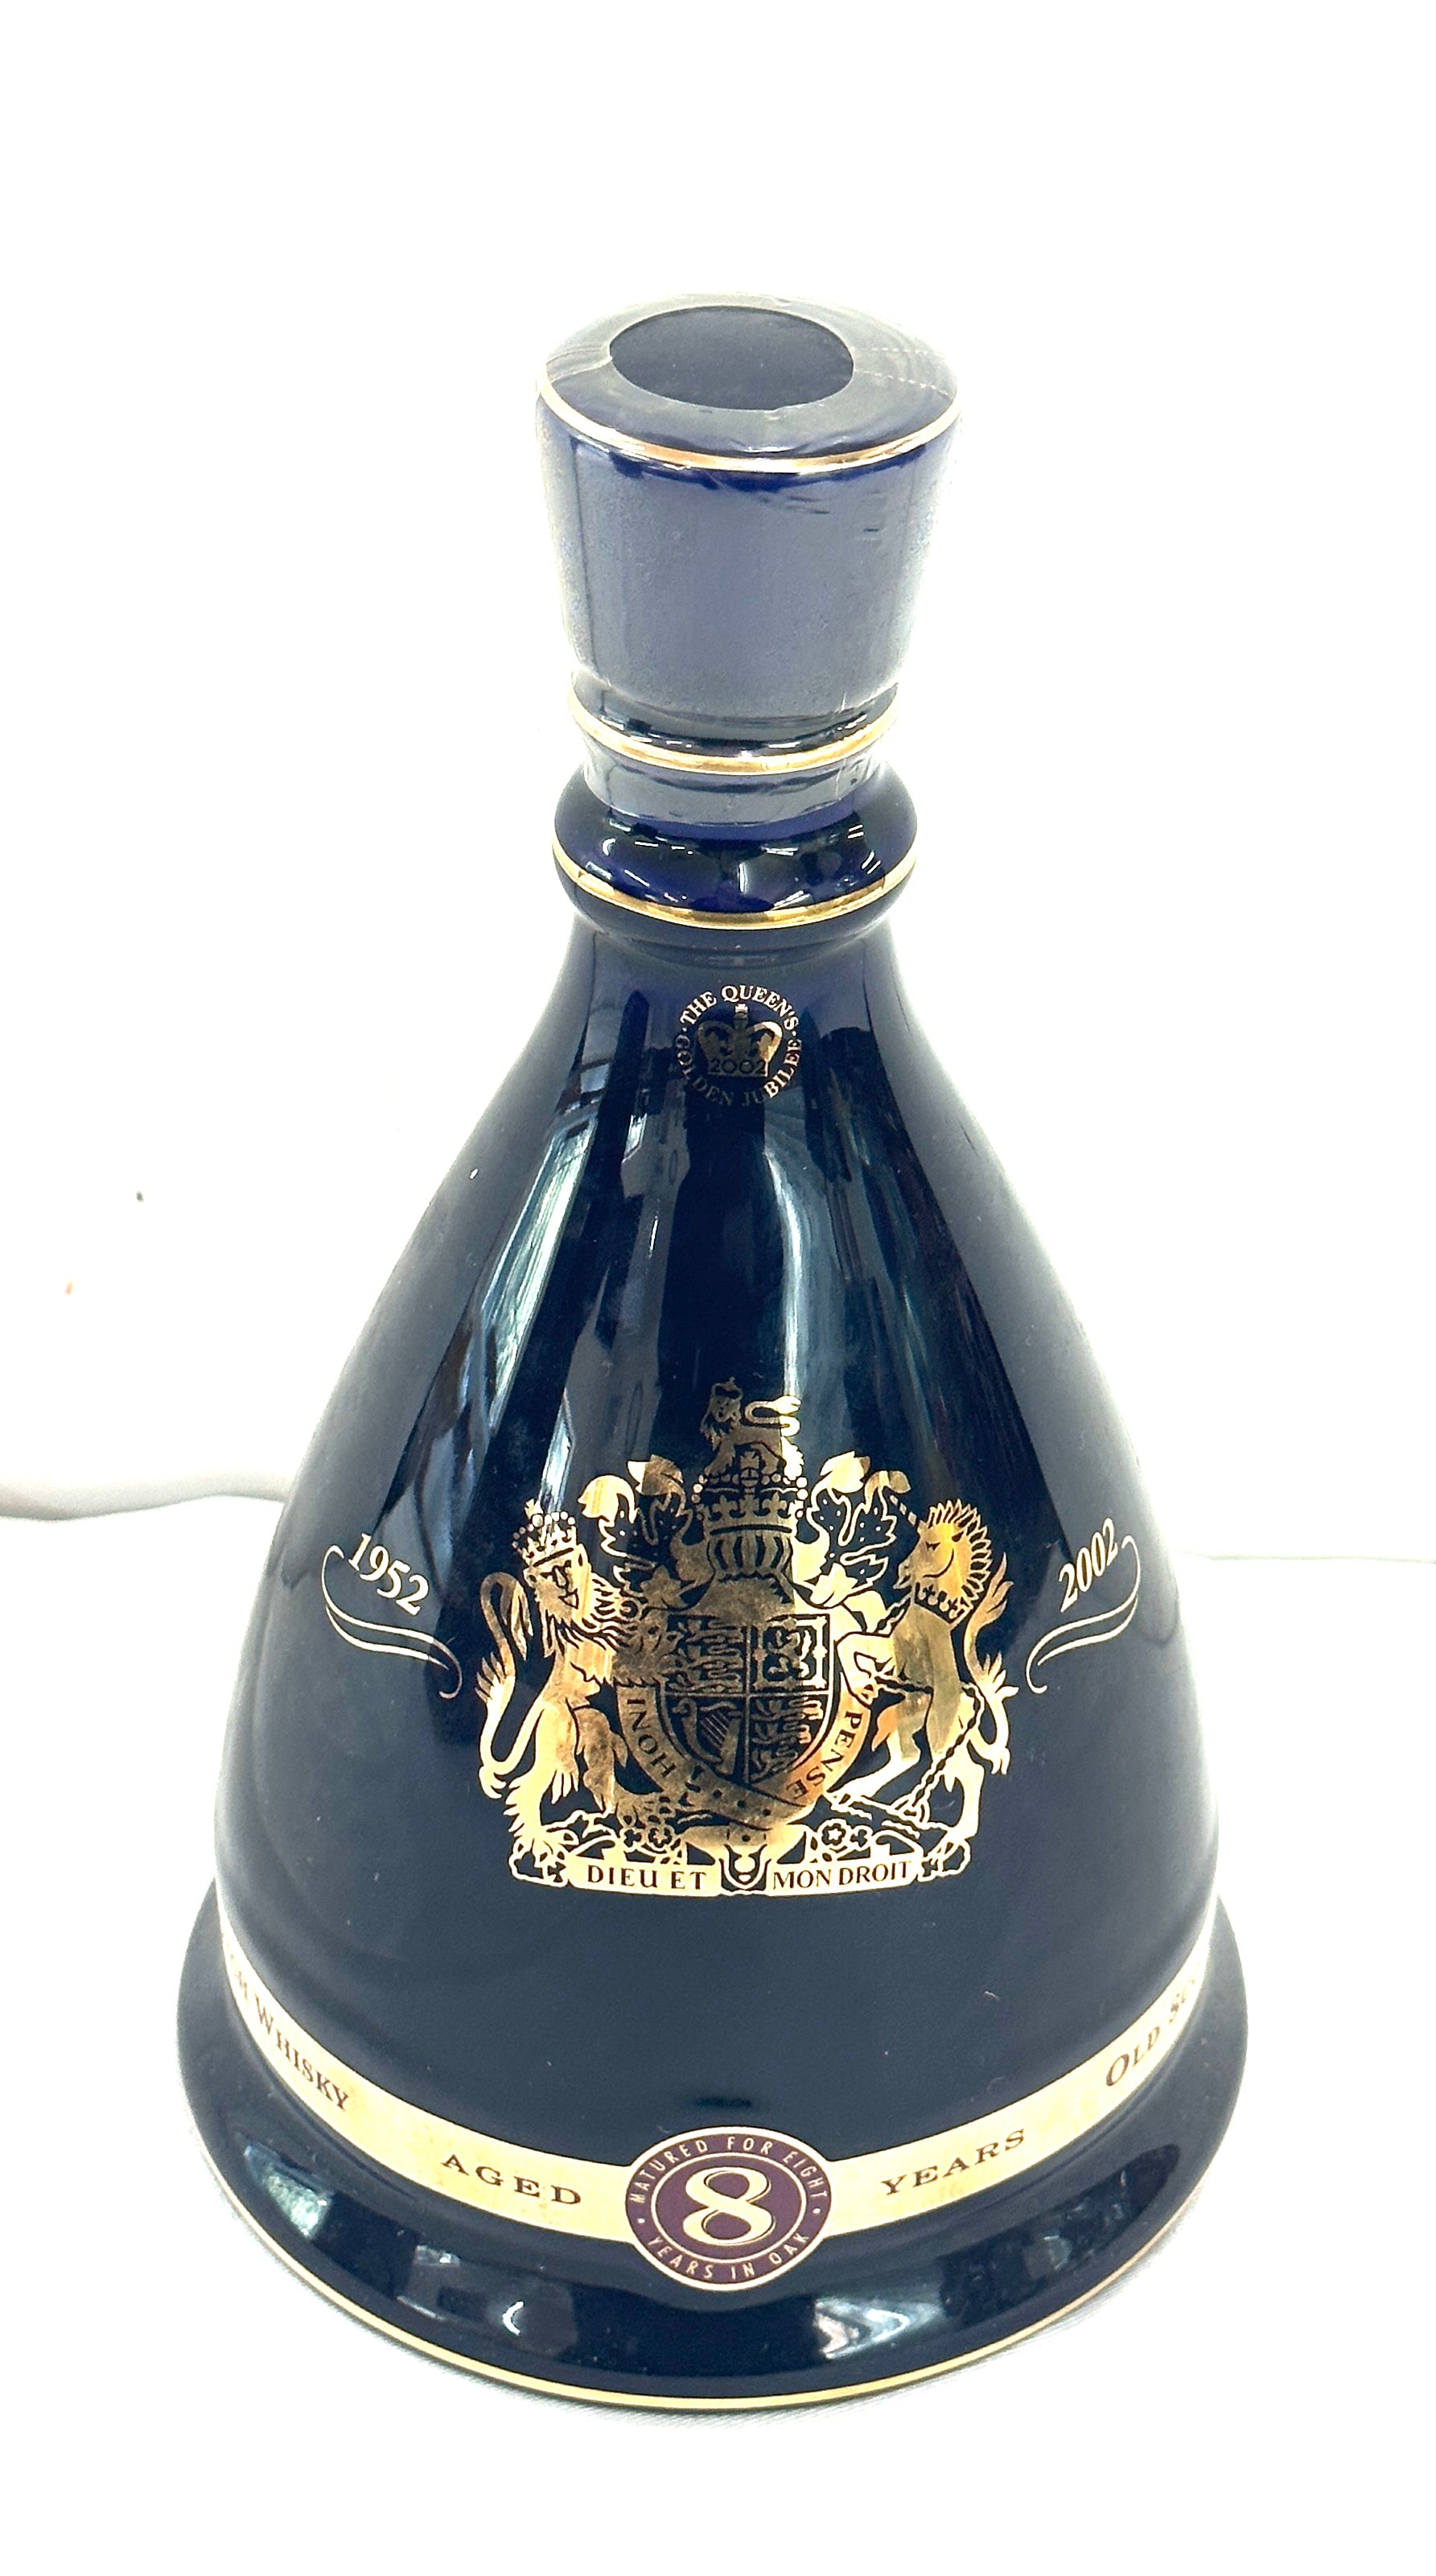 Bell's Celebrating 50 Years Reign HM Queen Elizabeth II Extra special old Scotch whisky decanter - Image 6 of 6